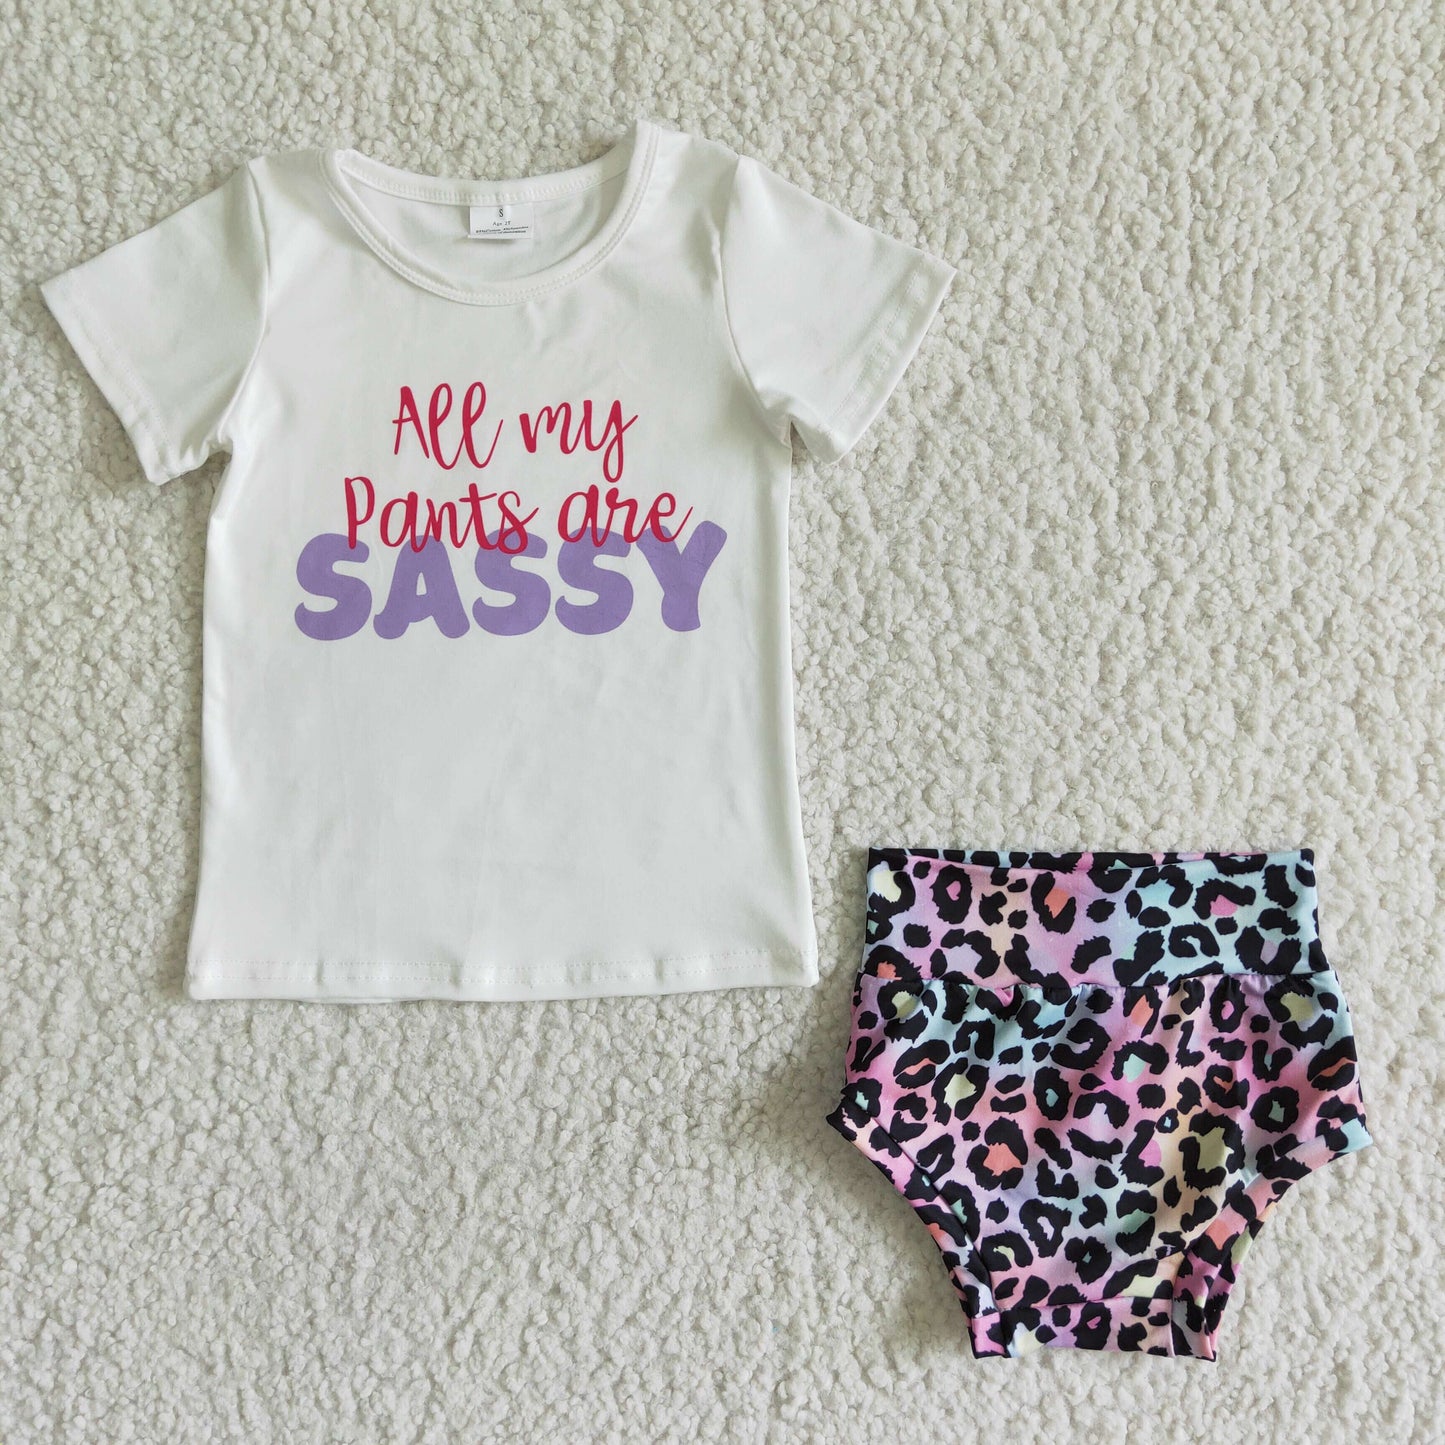 GBO0021 all my pants are sassy bummies outfits+headband